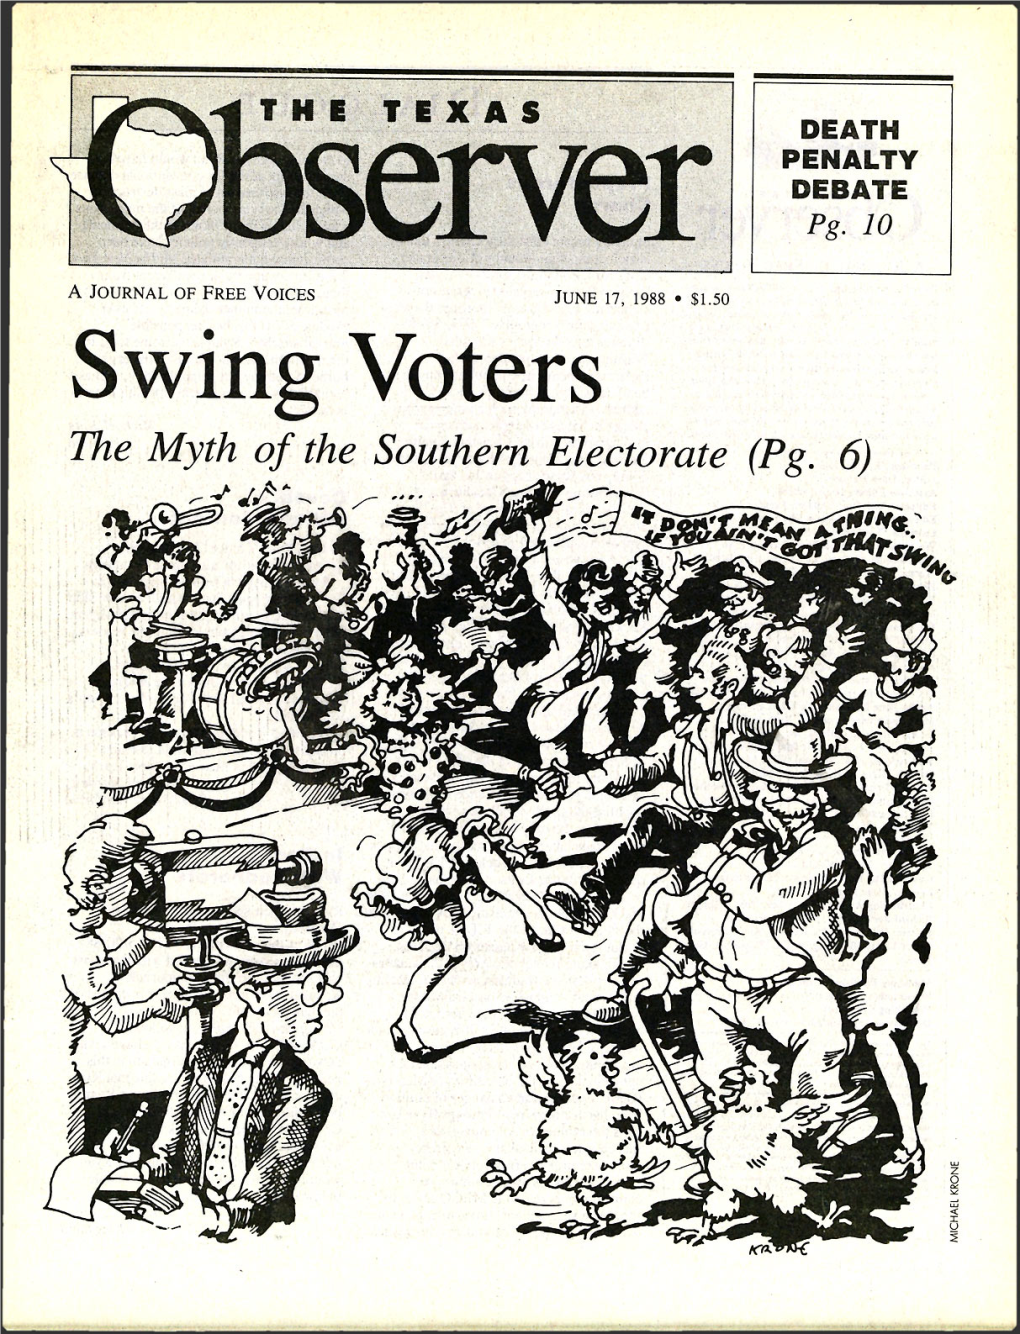 Swing Voters the Myth of the Southern Electorate (Pg